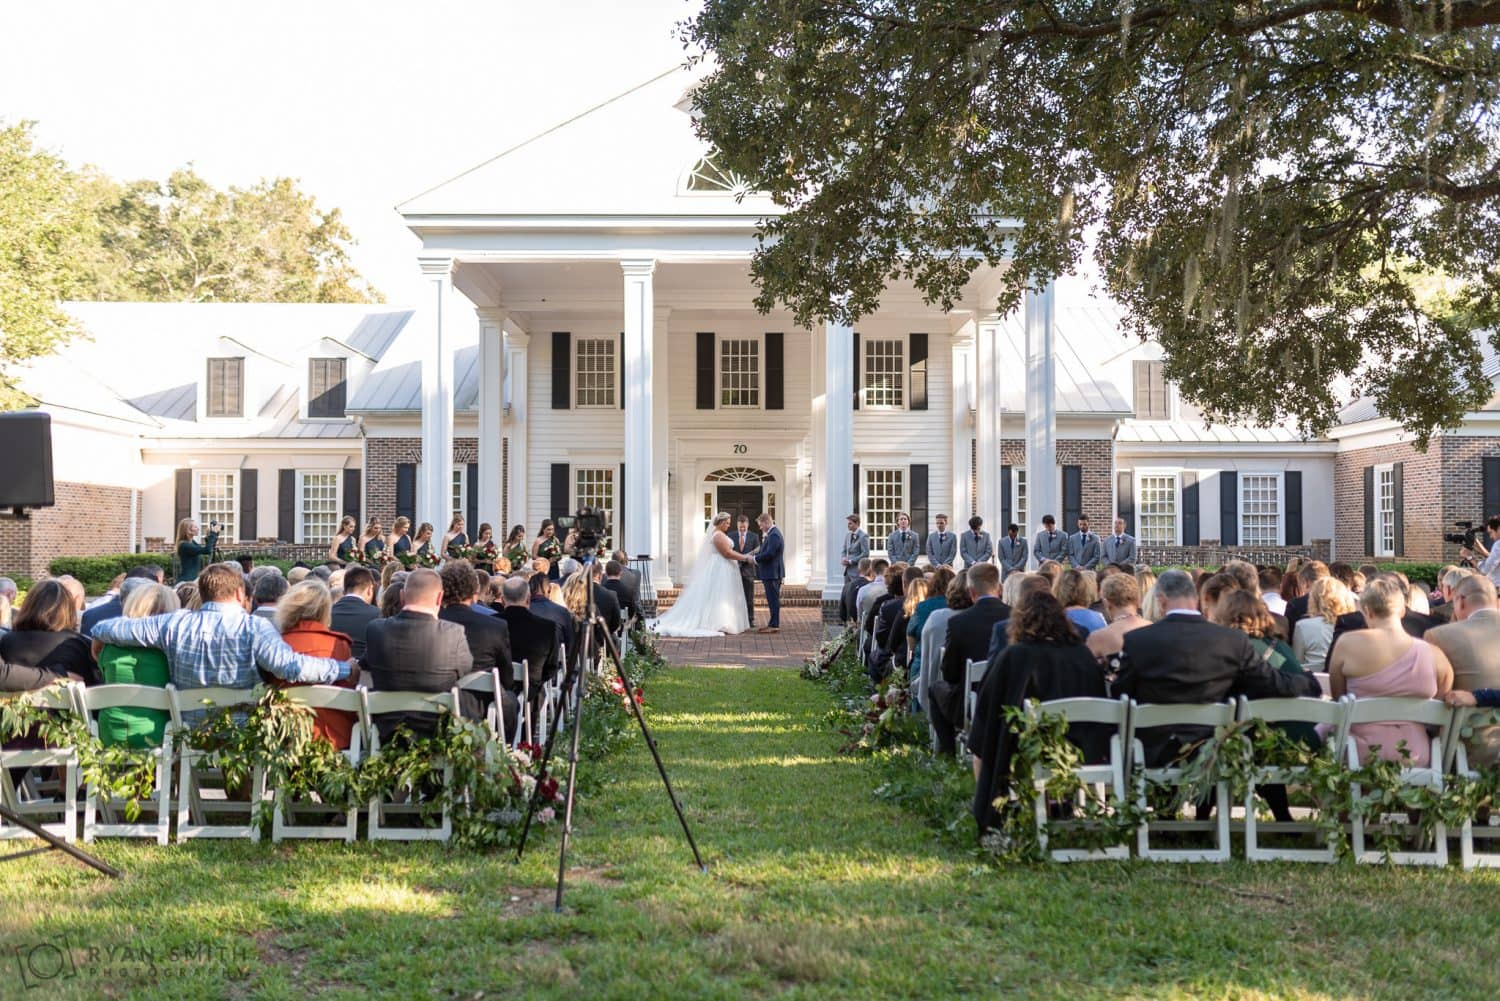 Ceremony on the front lawn by the columns